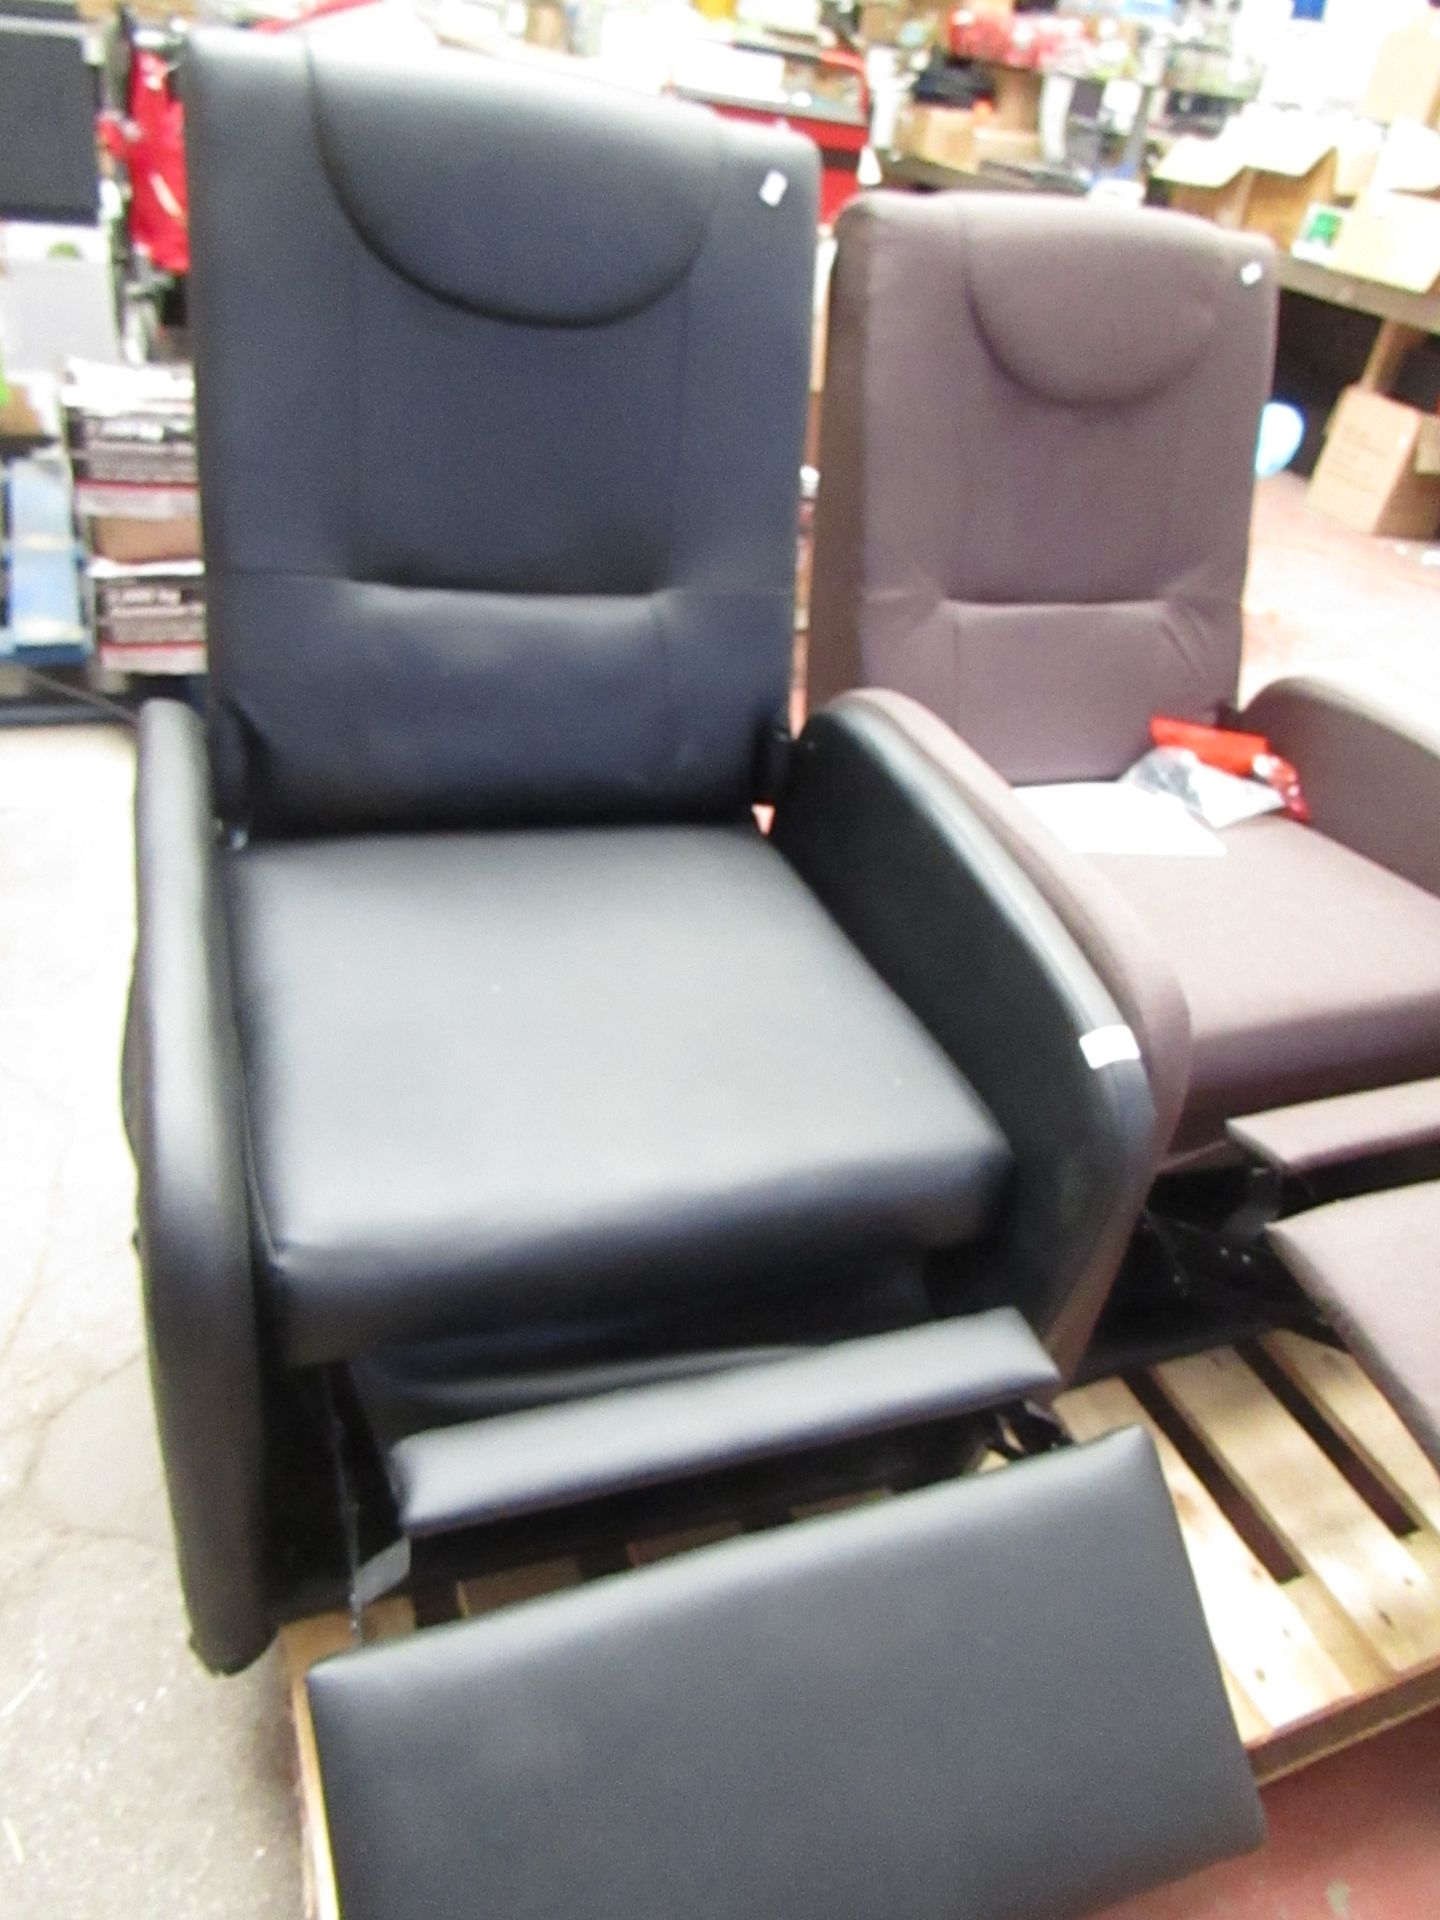 Small Reclining Chair Leather Style ) Footrest part needs attention